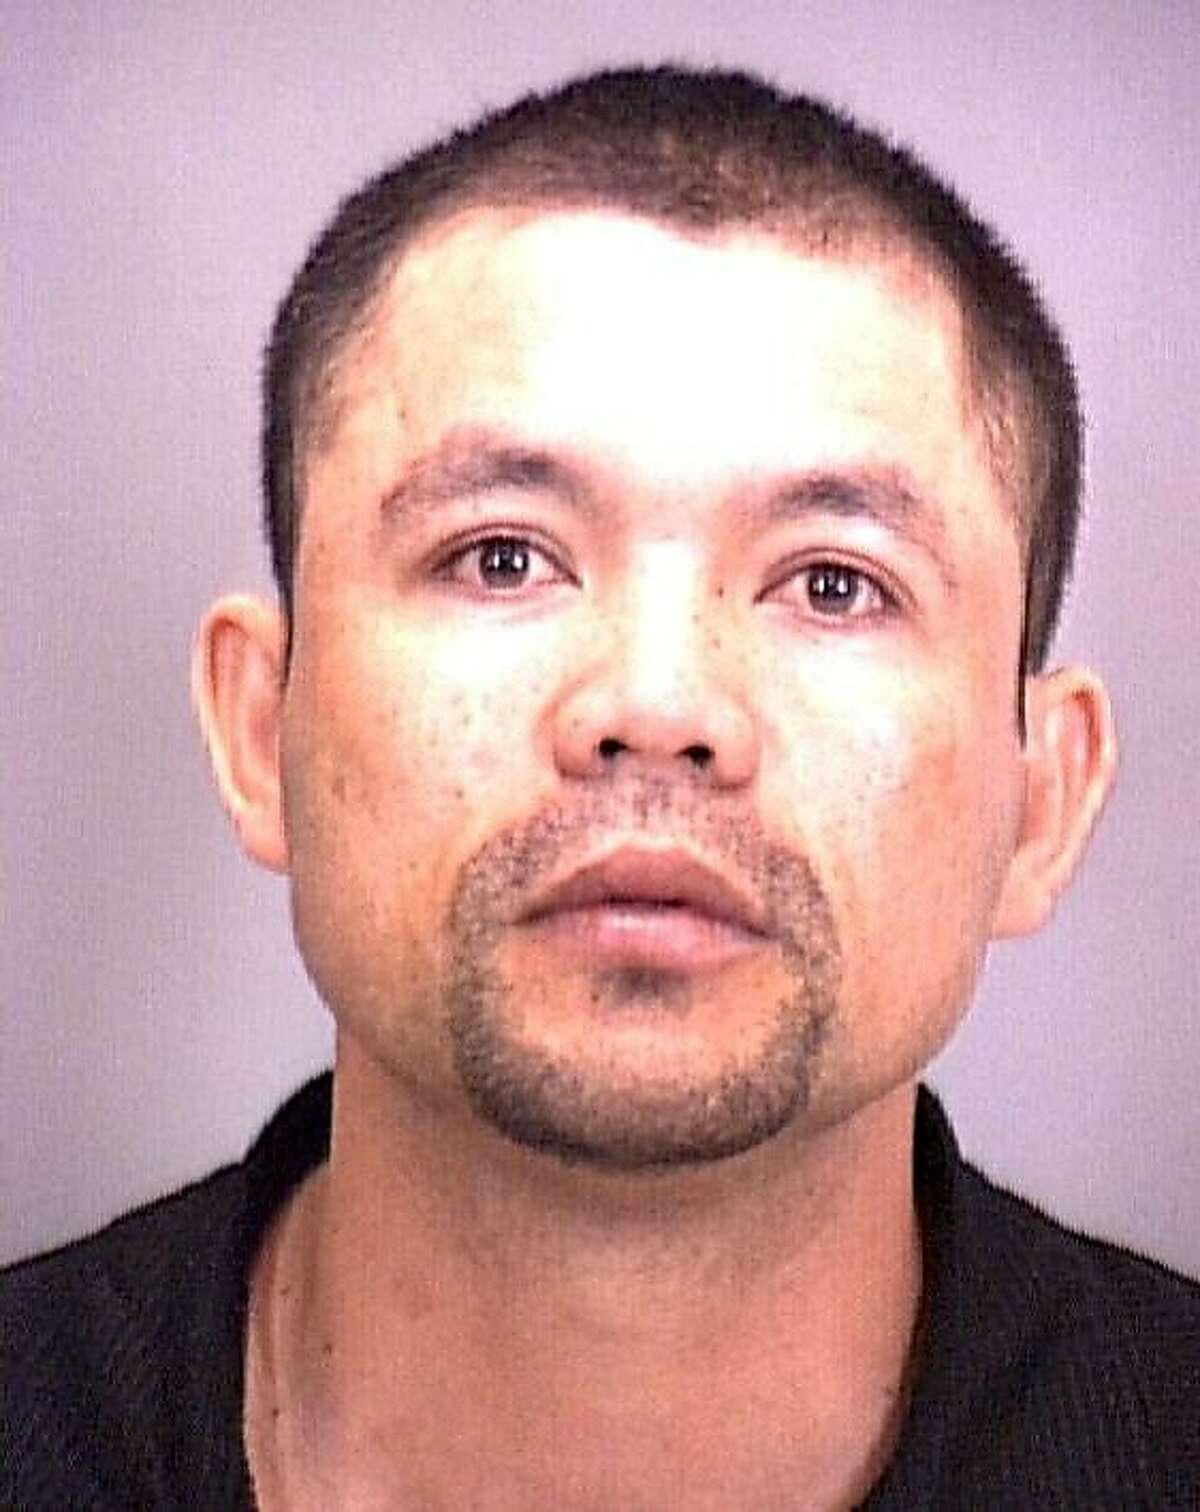 Police Tri Truong Le, age 42, who was shot to death Jan. 20, 2012, after abducting an 11-year-old girl from her San Jose home.